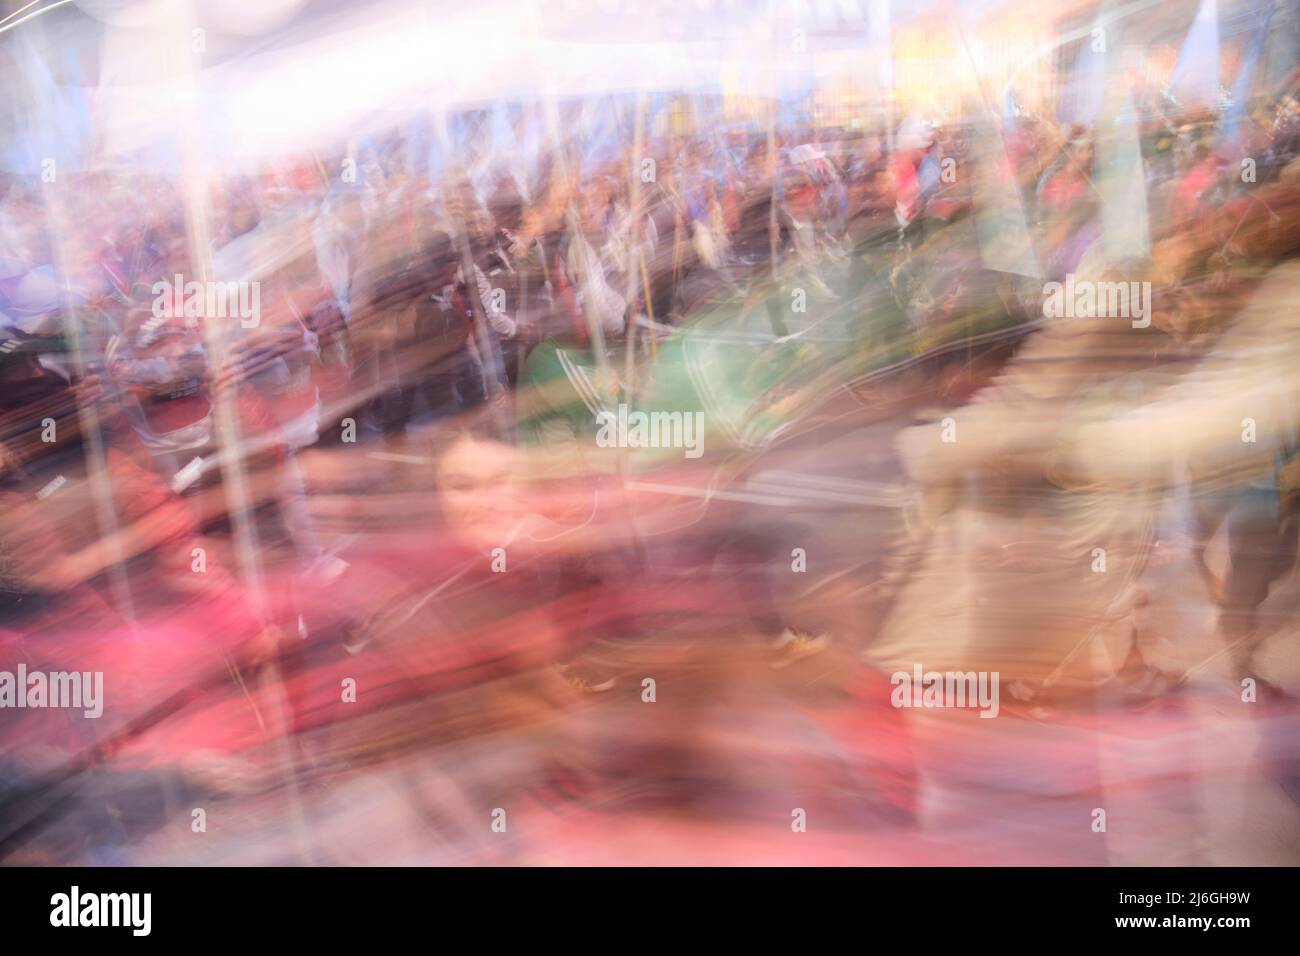 Long exposure photograph of a crowd, people marching during a demonstration. Intentional motion blur. Concepts: social protest, motion, dynamism, chao Stock Photo